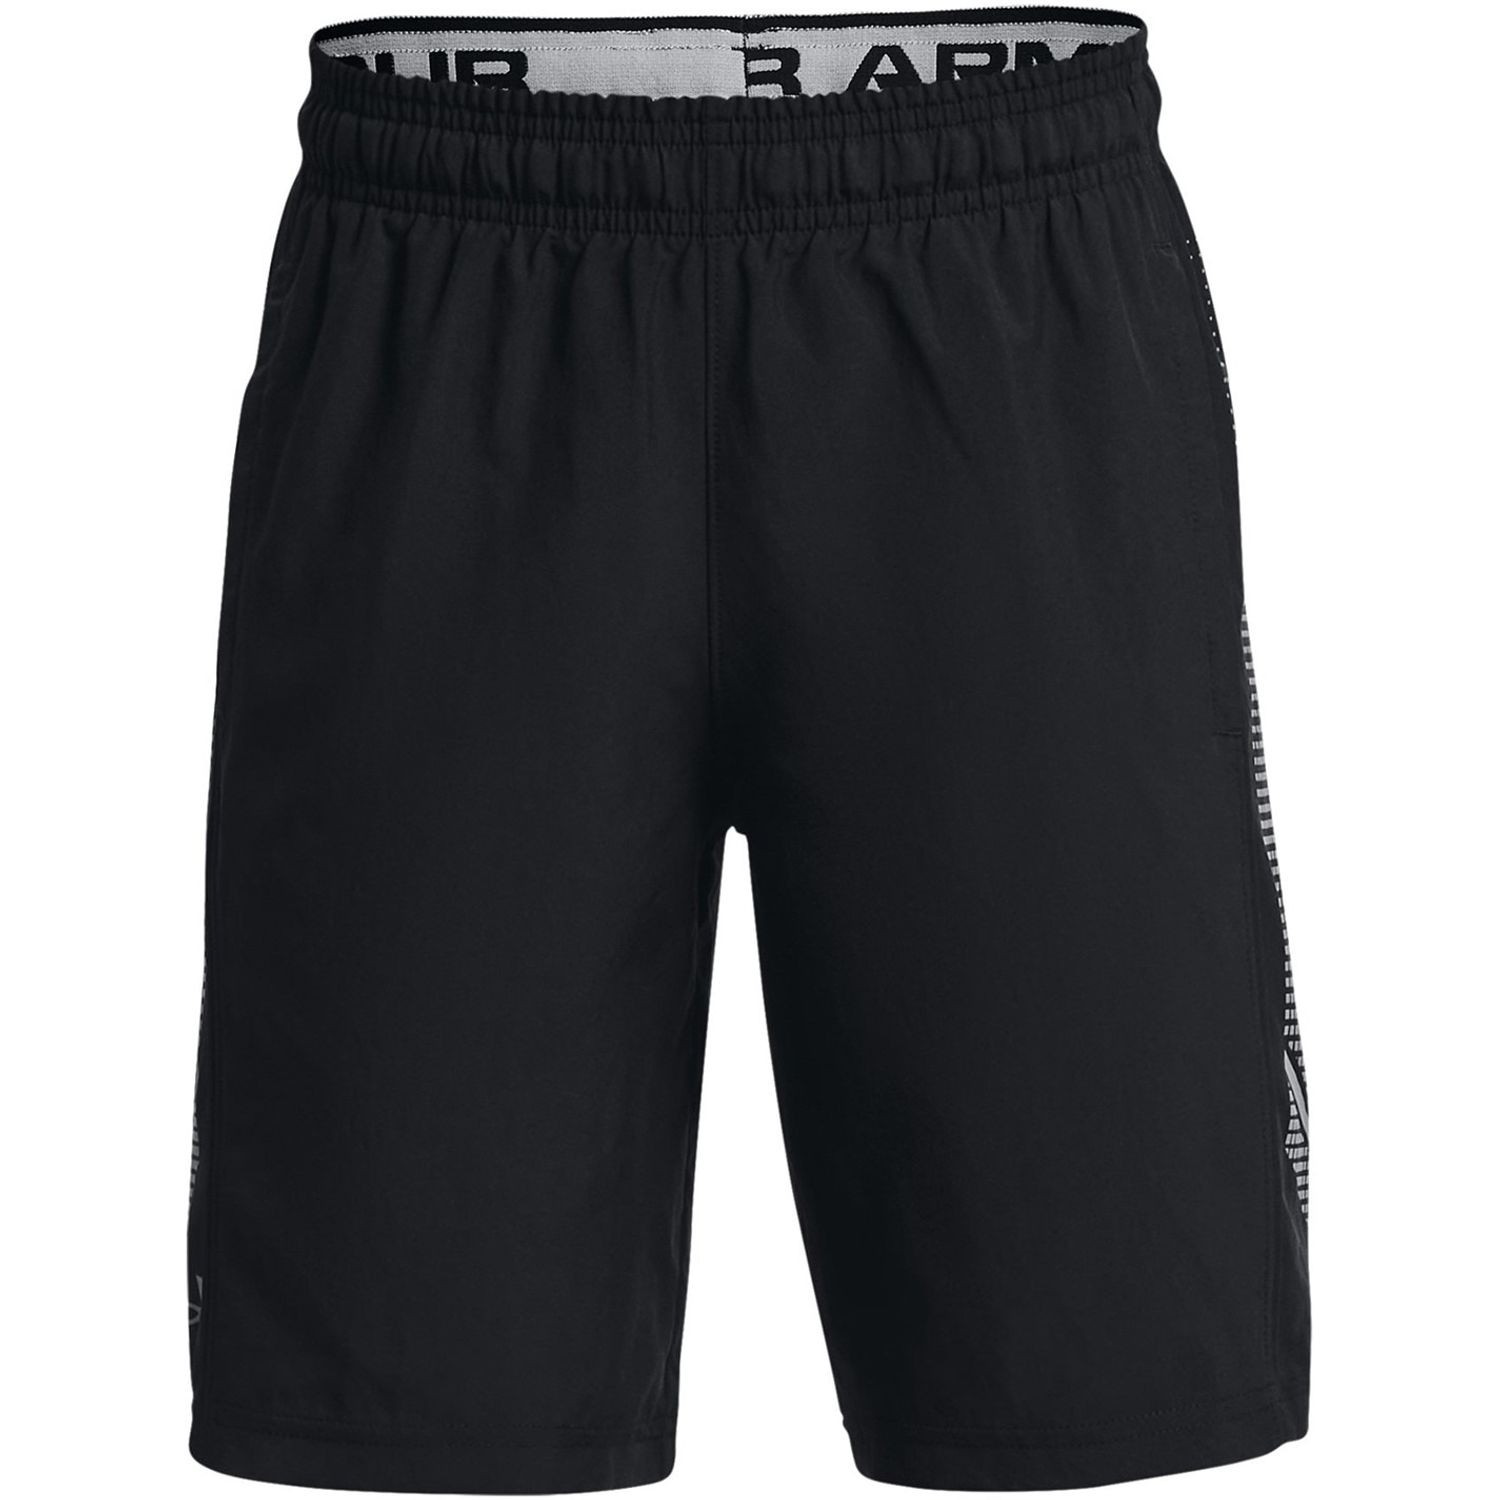 Black Under Armour Woven Shorts - Get The Label